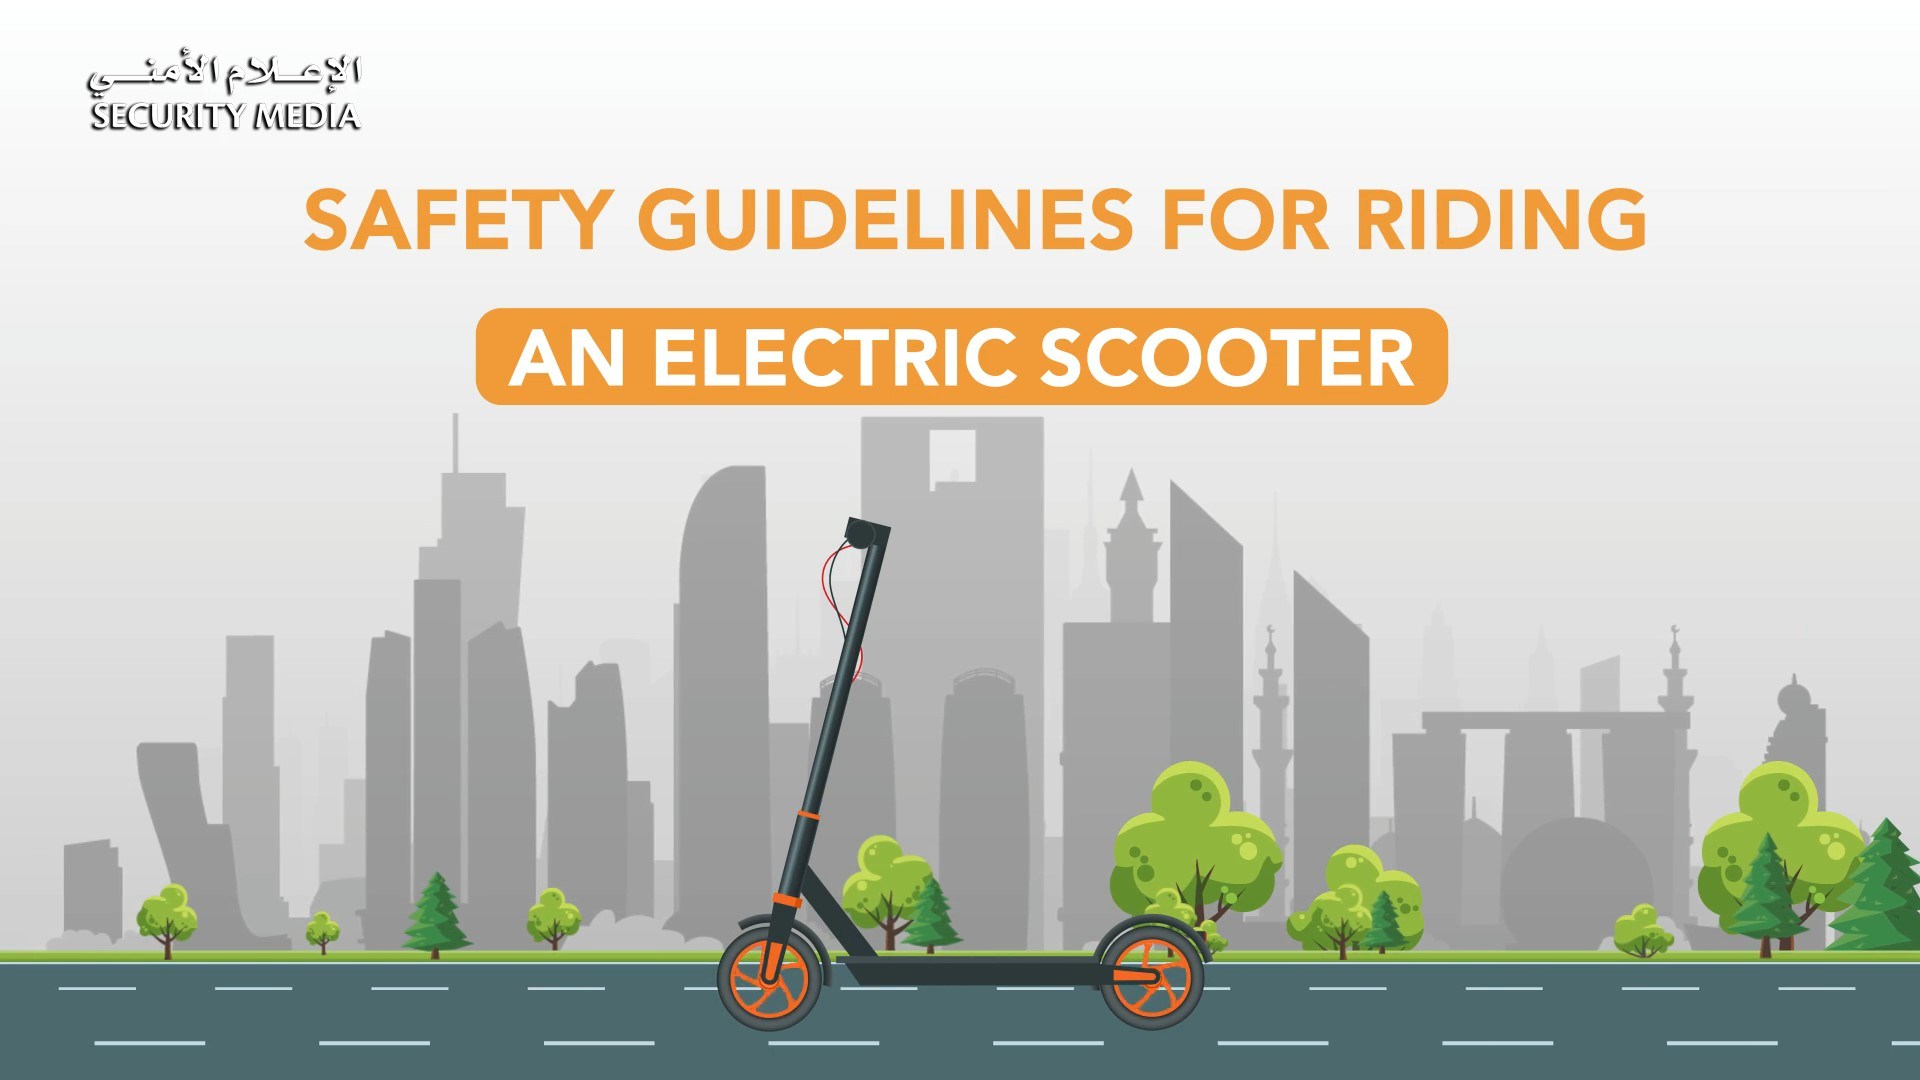 Safety guidelines for riding an electric scooter 2